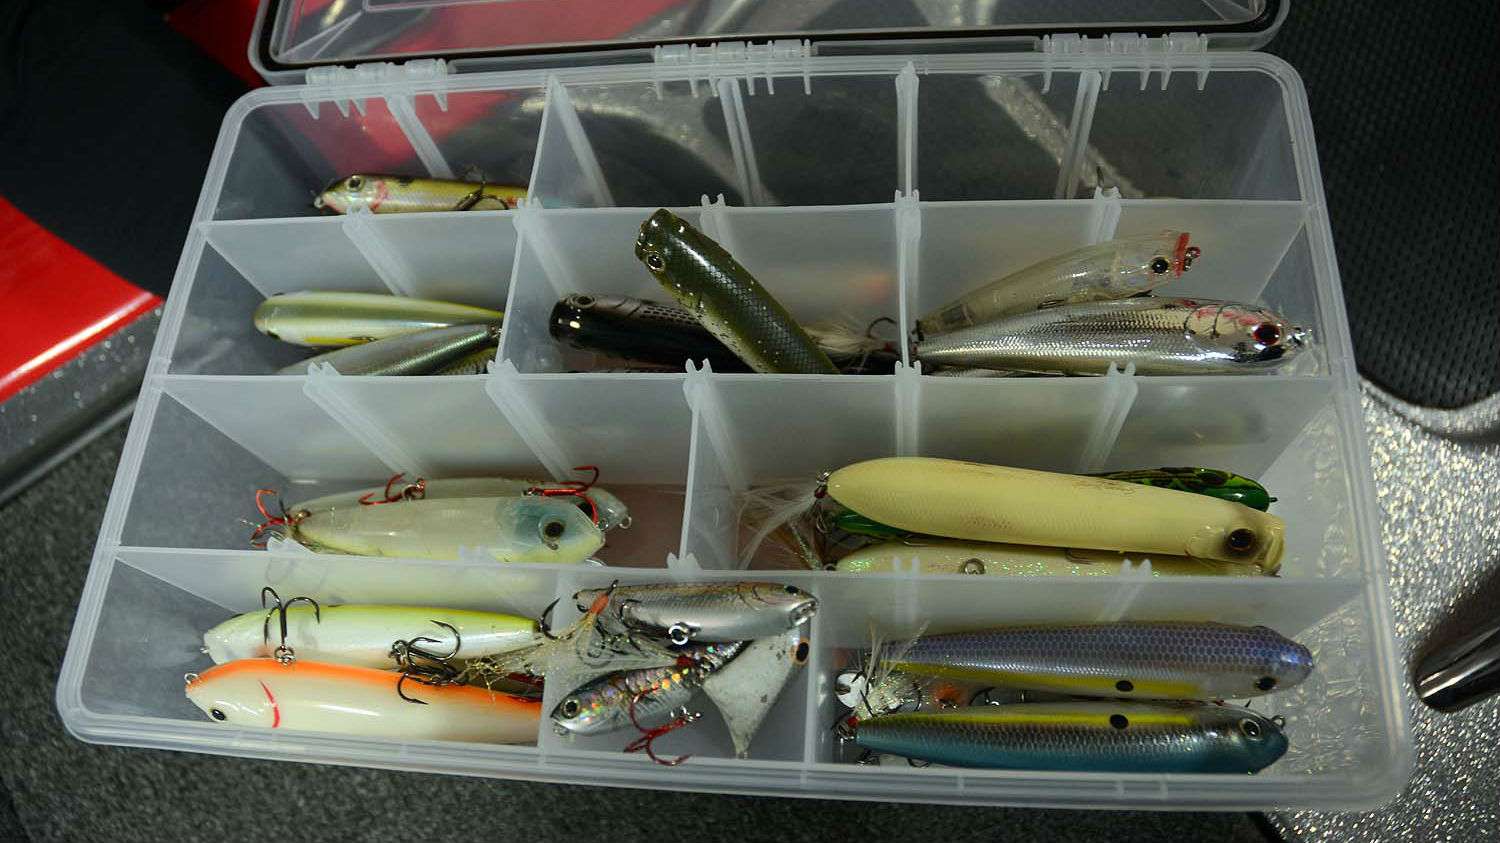 Topwaters have their place, too. Walkers, chuggers and other topwater lures find a home here. 